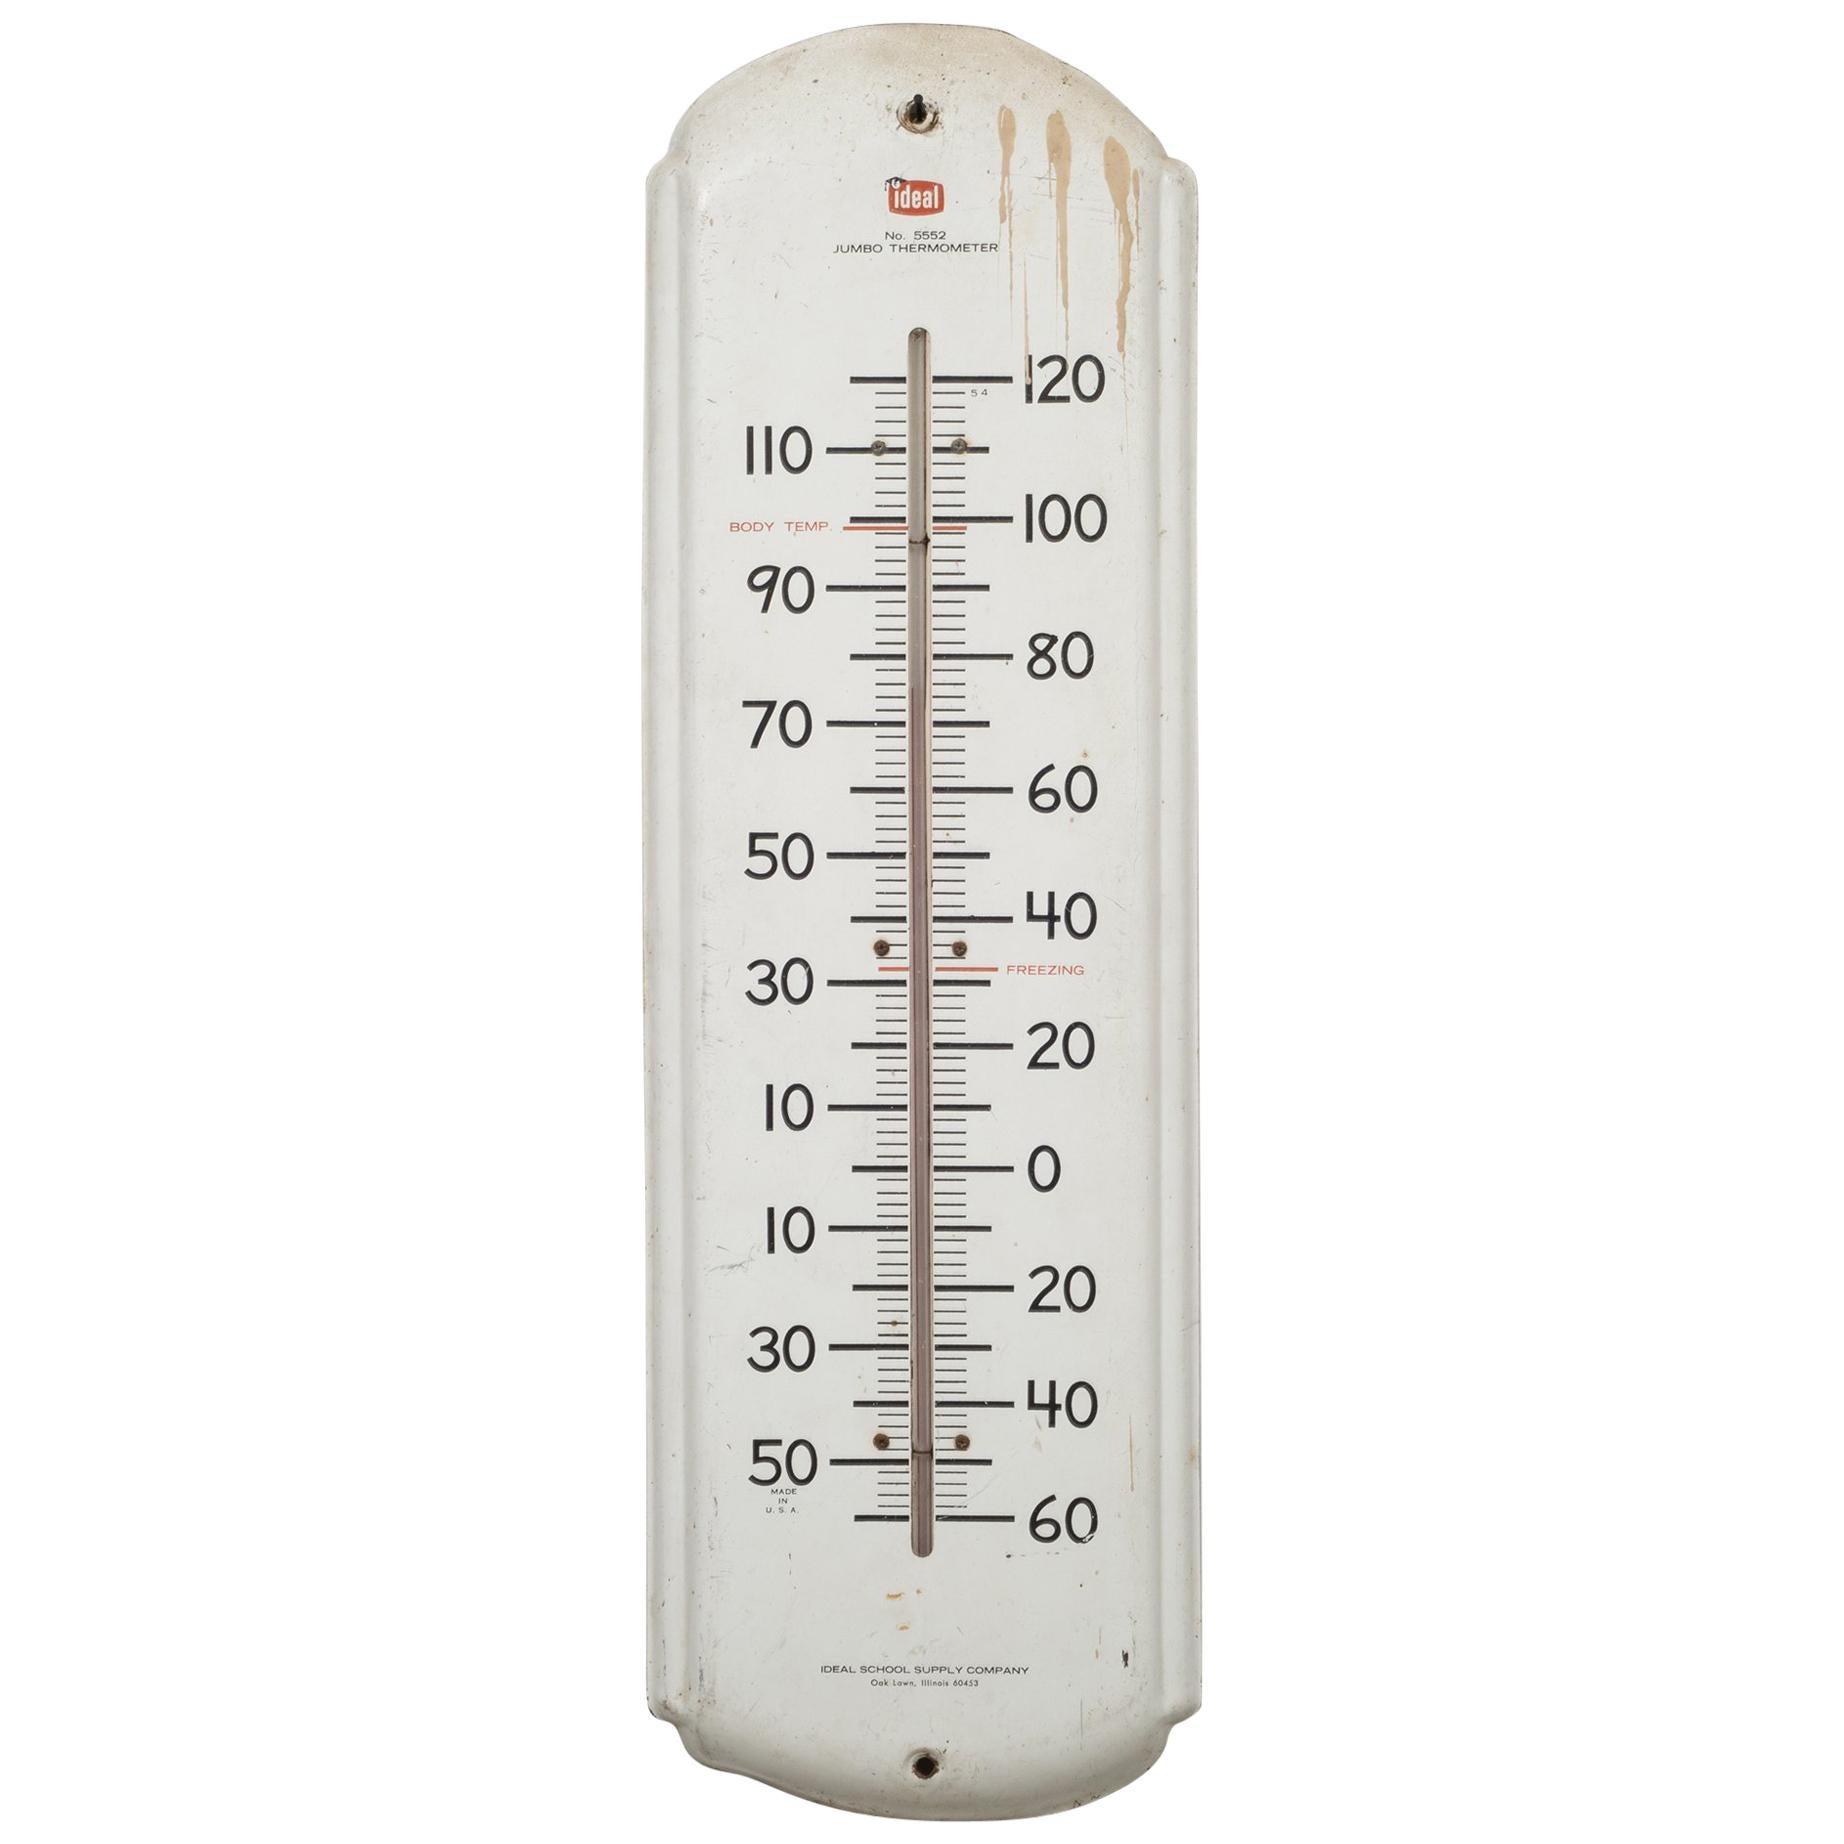 https://a.1stdibscdn.com/midcentury-ideal-school-supply-company-jumbo-thermometer-circa-1960s-for-sale/1121189/f_123129331539414776497/12312933_master.jpg